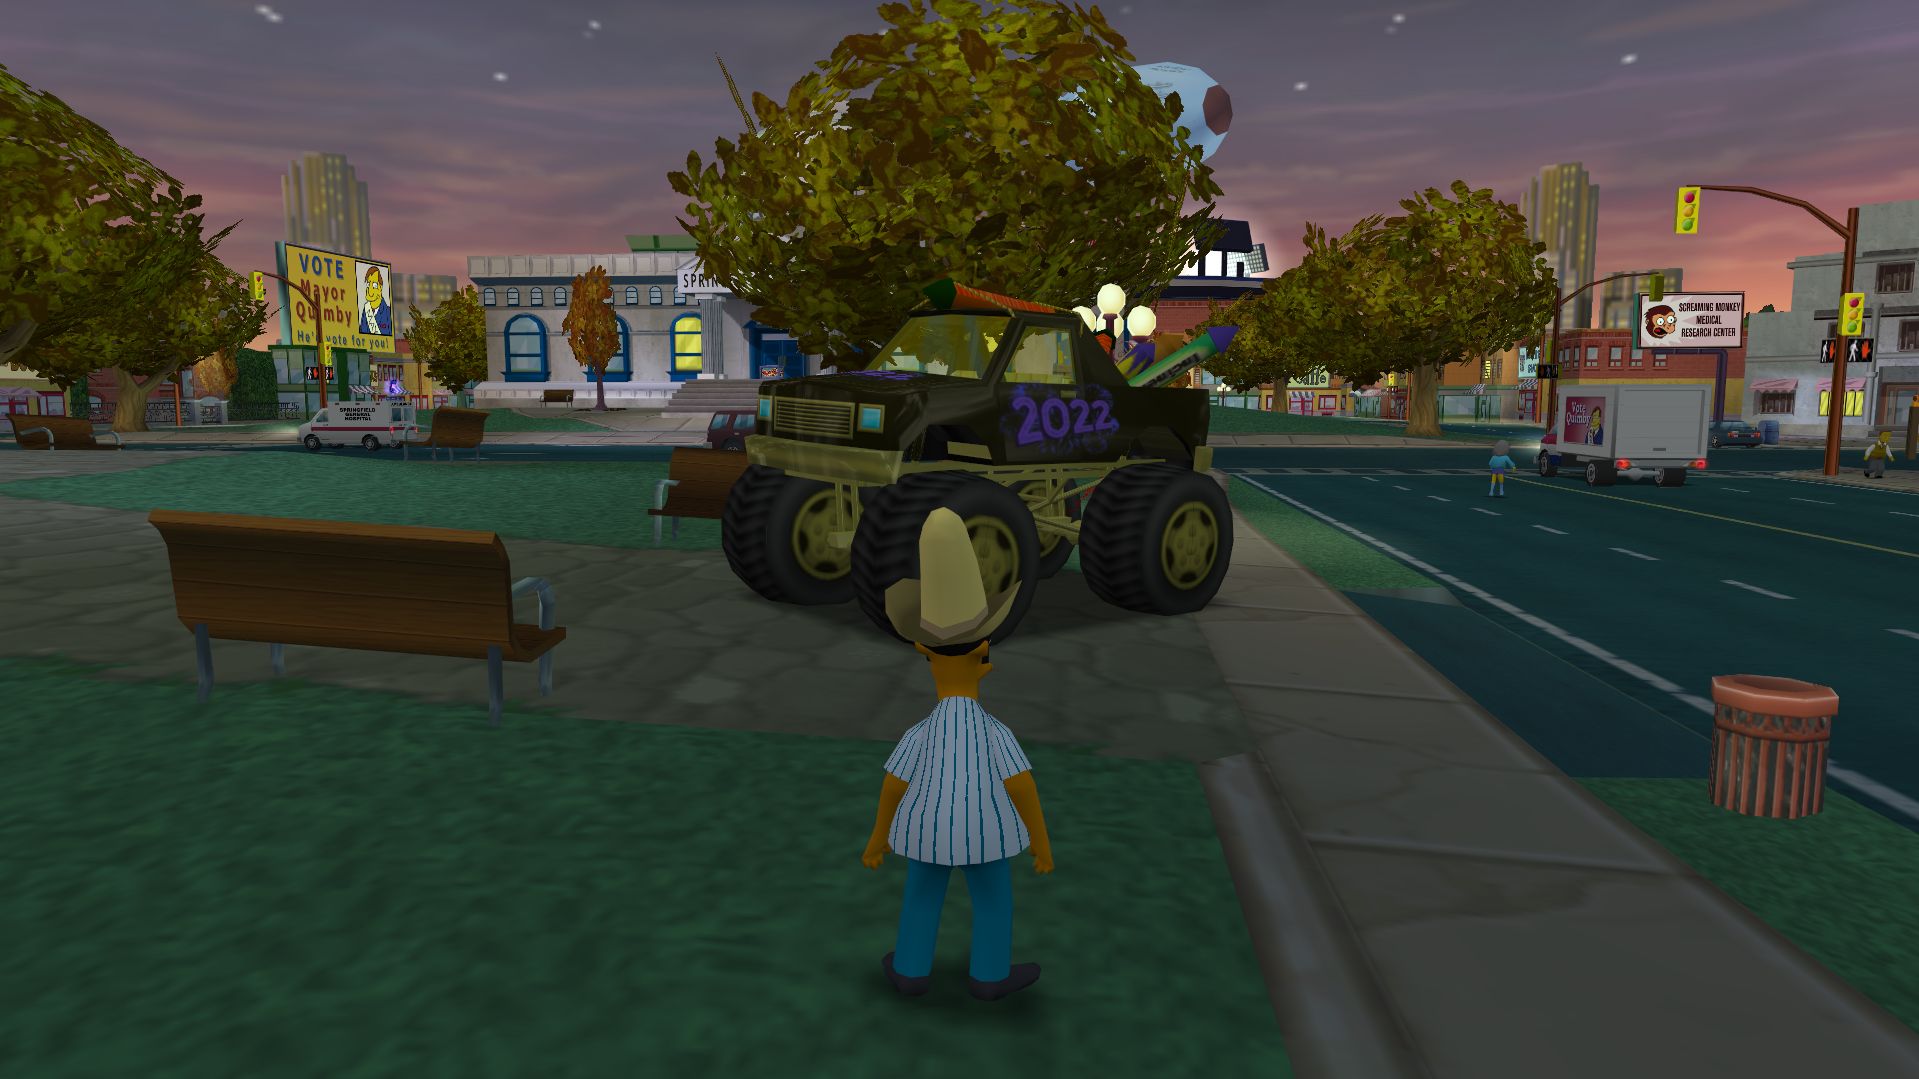 Apu standing in front of the New Year's 2022 Monster Truck.